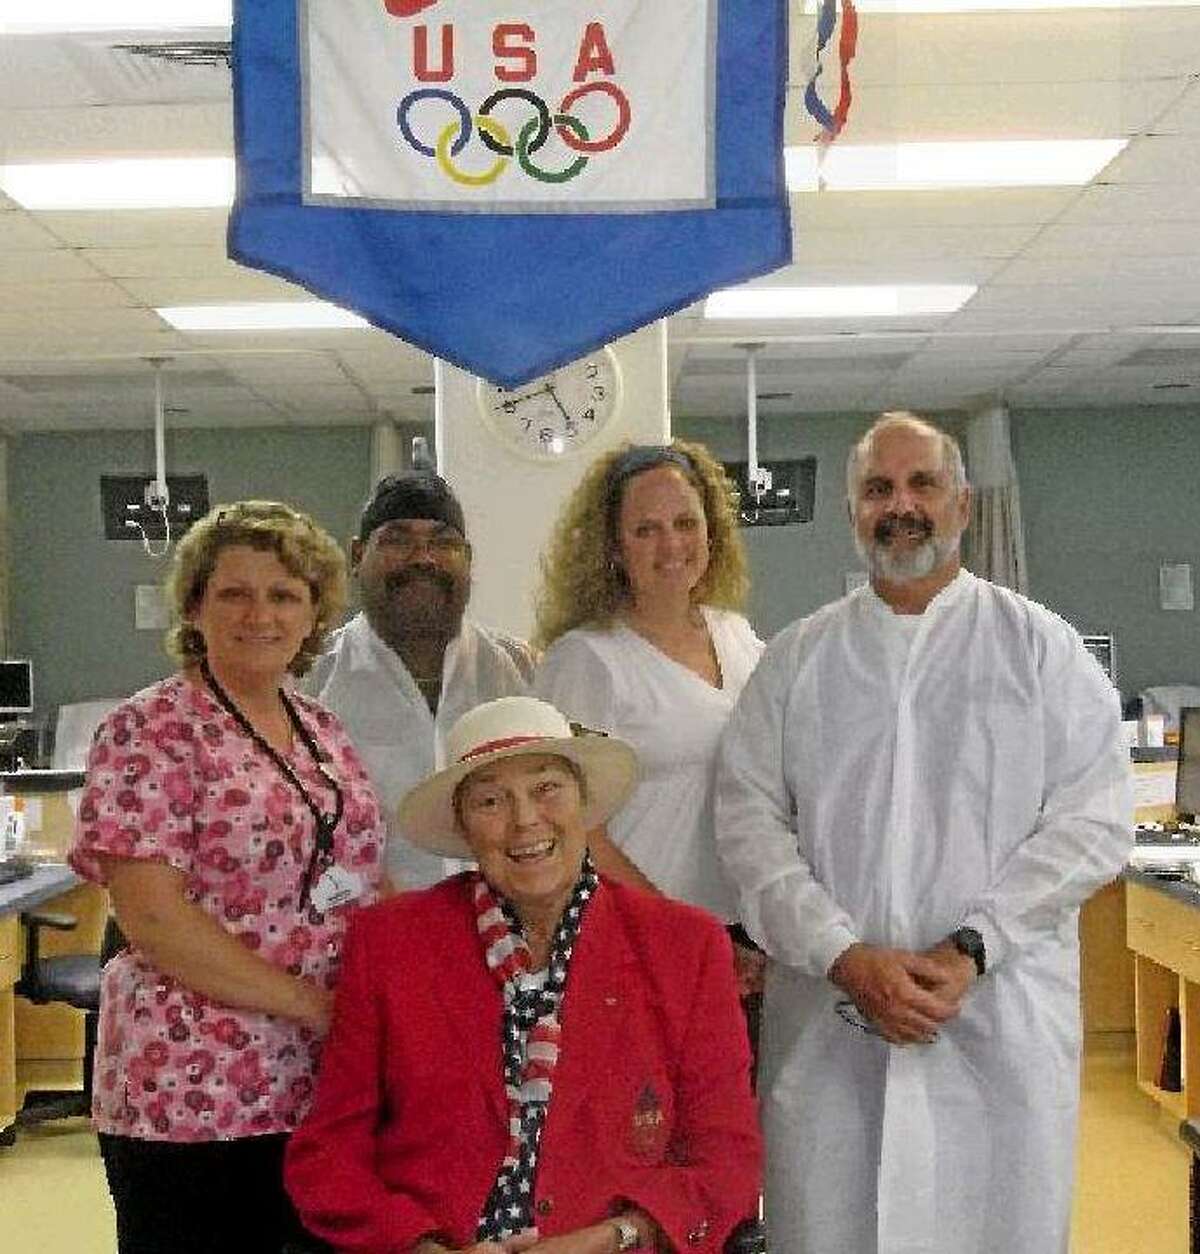 Darlene "Poochie" Montgomery (front) was selected to be one of the first women to demonstrate judo in the 1980 Olympics, which the United States boycotted. Now, she has a new Olympic team at DaVita Dialysis in Torrington, standing under her Olympic flag signed by the 1980 Olympic judo team. Montgomery is wearing the American Olympic outfit from the 1996 games during which she was the manager of the United States' judo team. Back, from left to right: Jo Madia, Nelson Vega, Tracy Morales-Gabelman and Alex Gubbiotti. (MICHELLE MERLIN/Register Citizen)